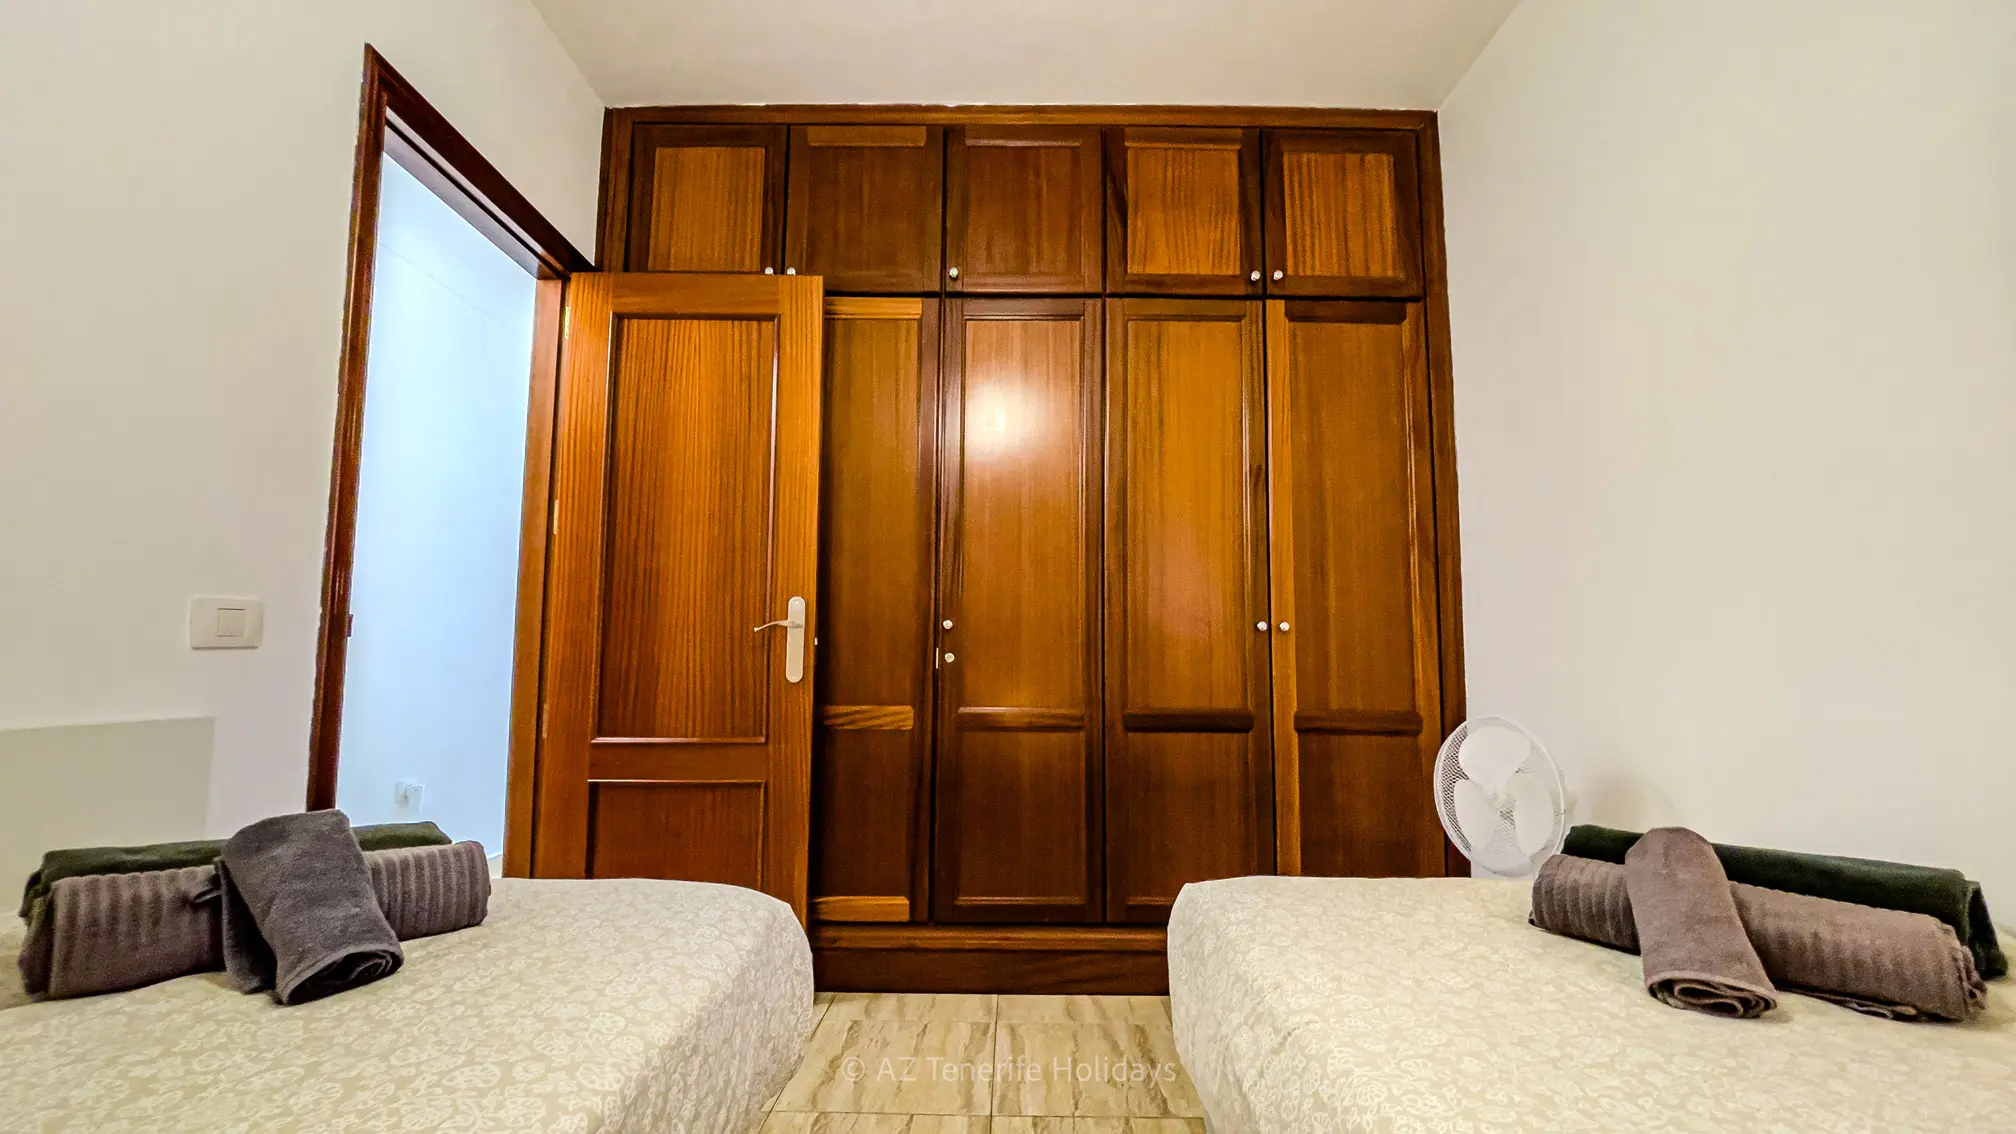 Beds and wardrobes of the twin room in Tenerife Relax Apartment in Palm-Mar, Tenerife